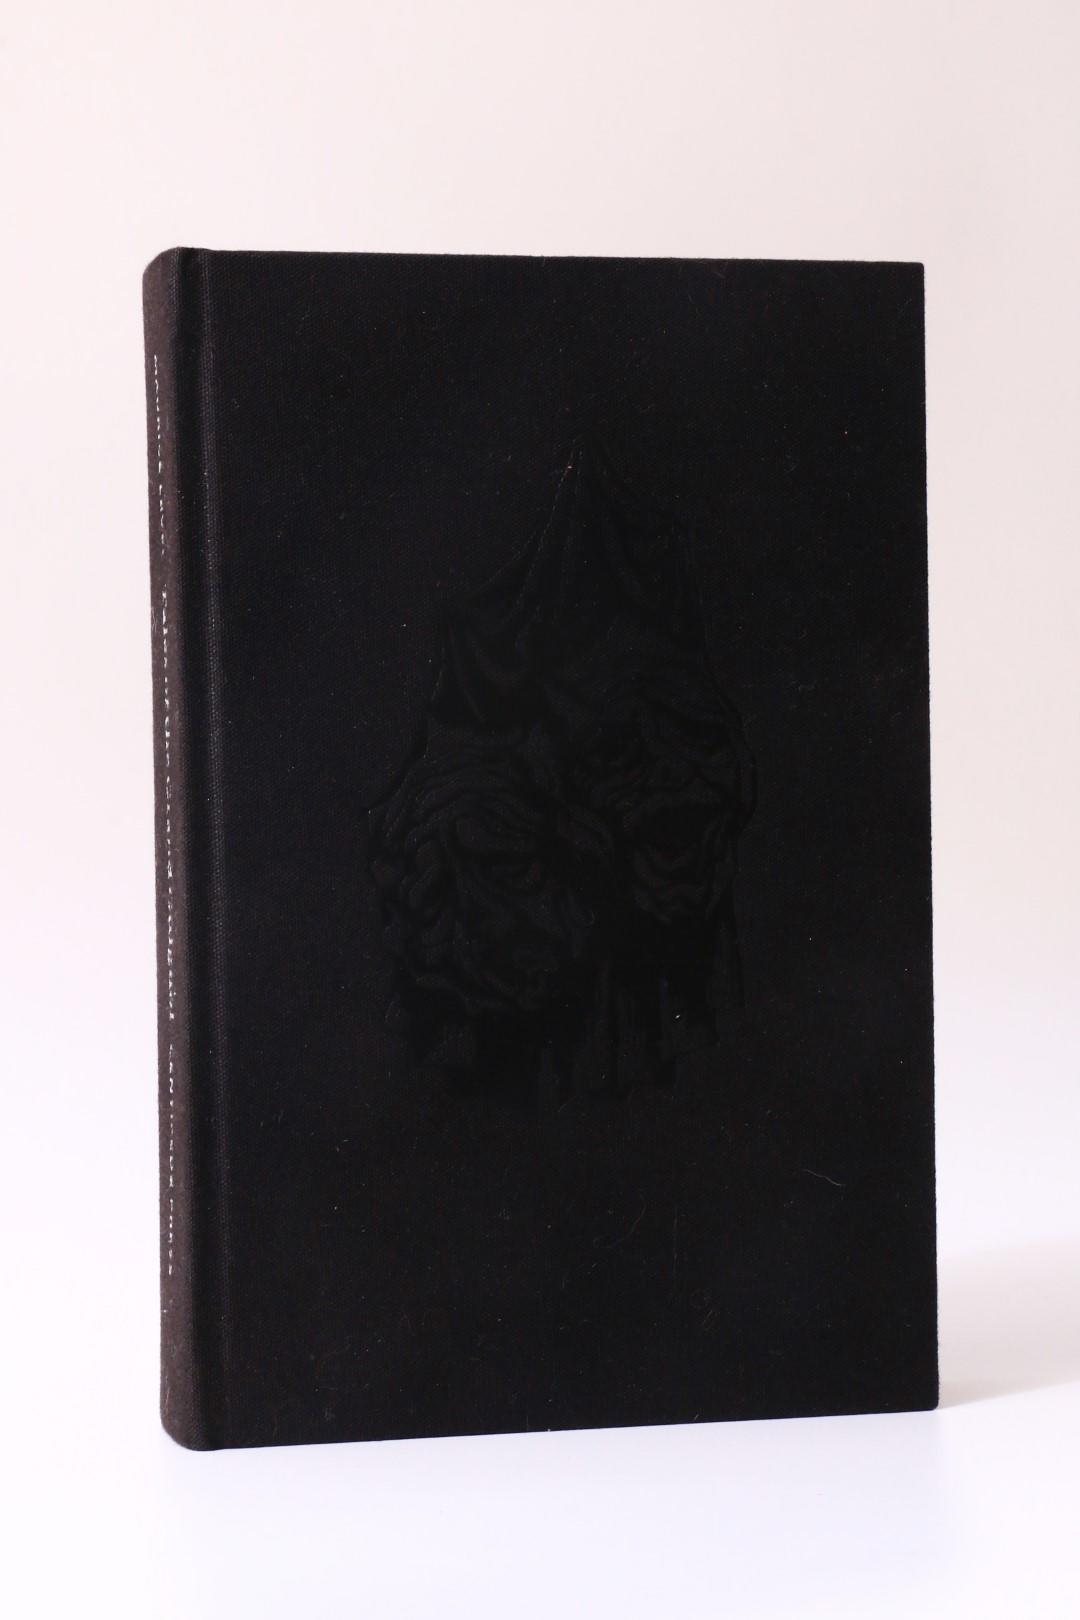 Maurice Level - Tales of the Grand Guignol - Centipede Press, 2011, Limited Edition.